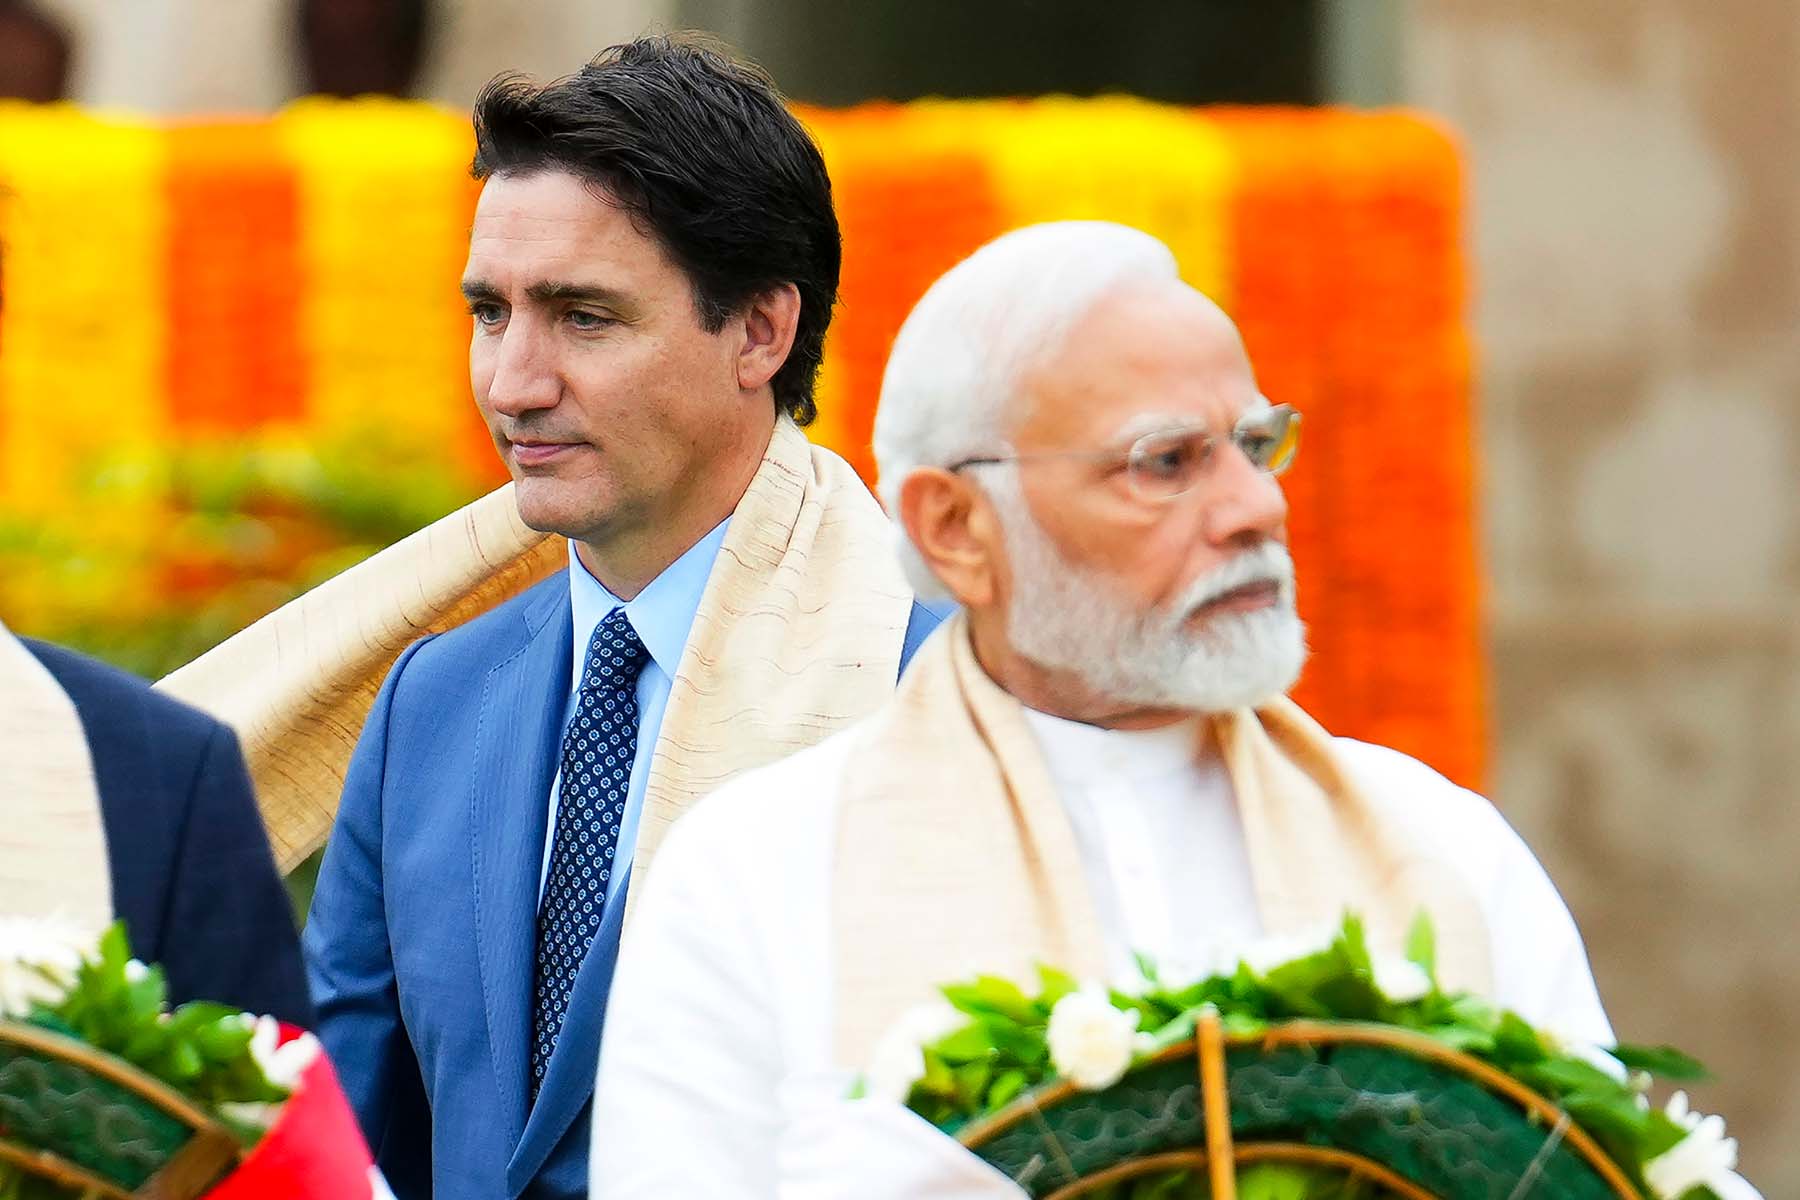 A closeup of Canadian Prime Minister Justin Trudeau facing away from Indian Prime Minister Narendra Modi at Raj Ghat, against a backdrop of yellow and orange decorations at Mahatma Gandhi's cremation site, during the G20 Summit in New Delhi in 2023.